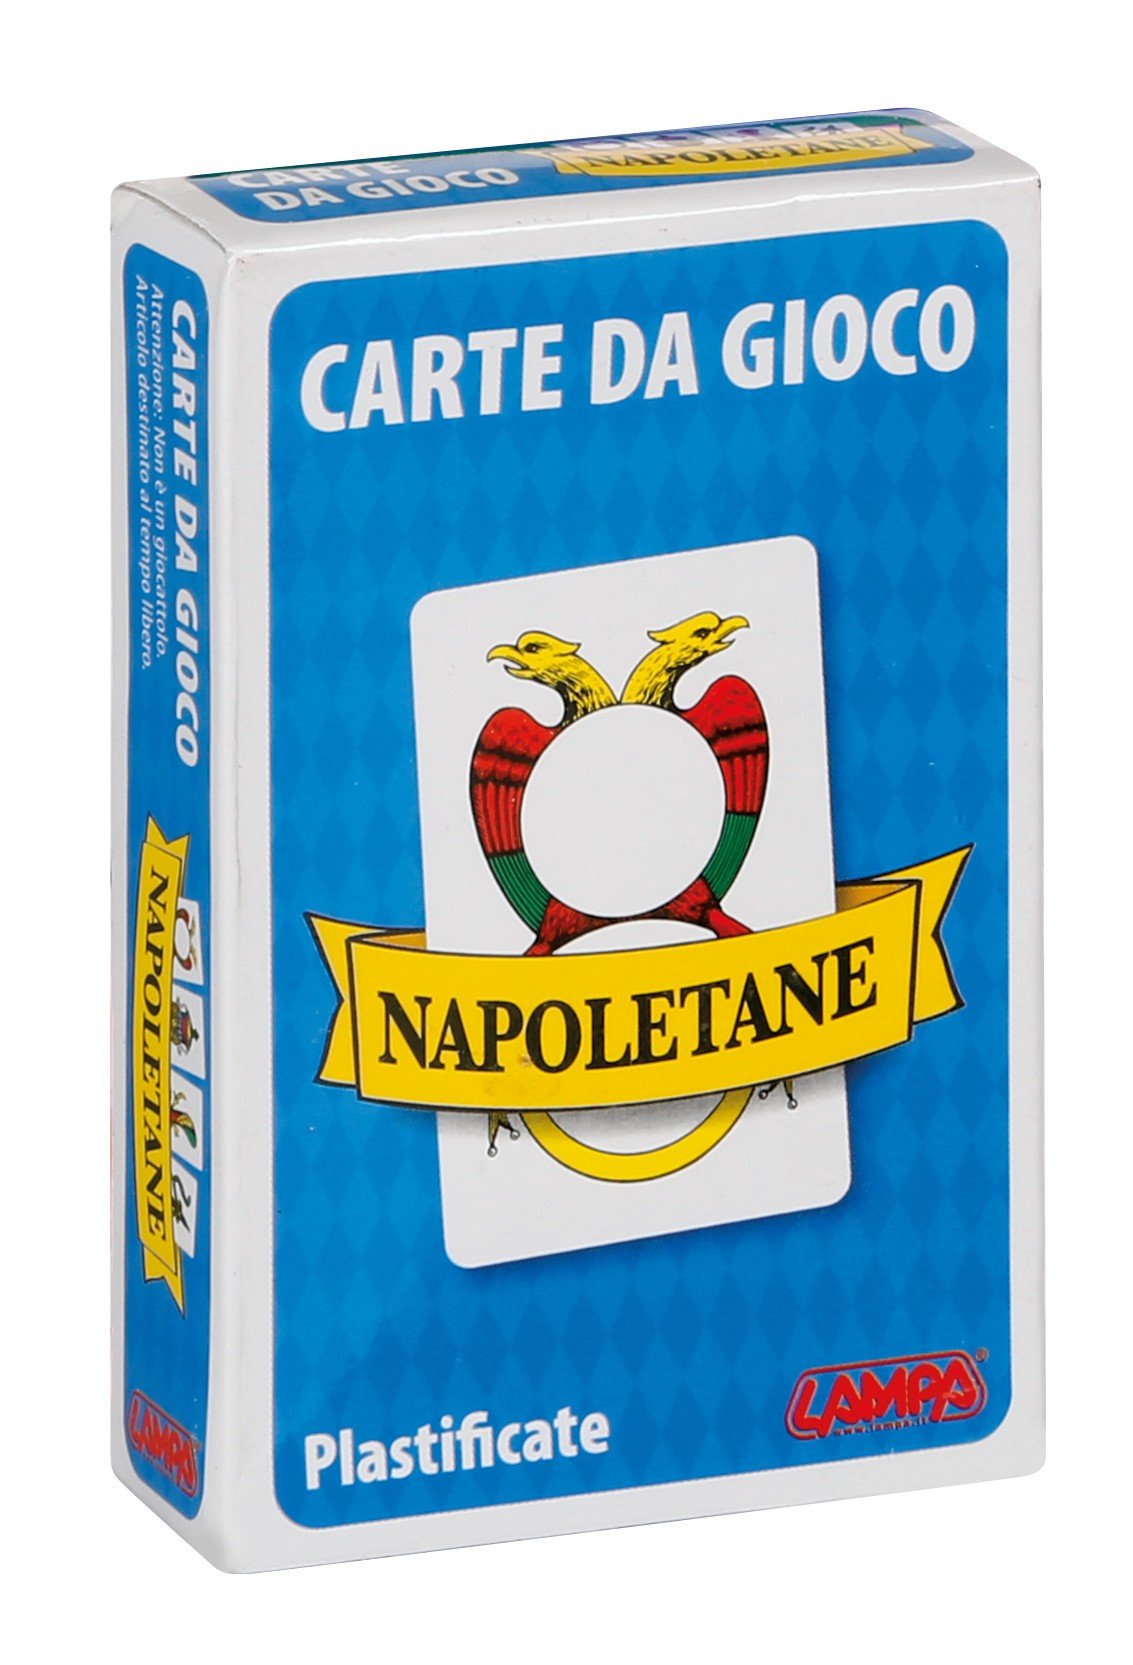 Neapolitan playing cards - Plastic coated paper